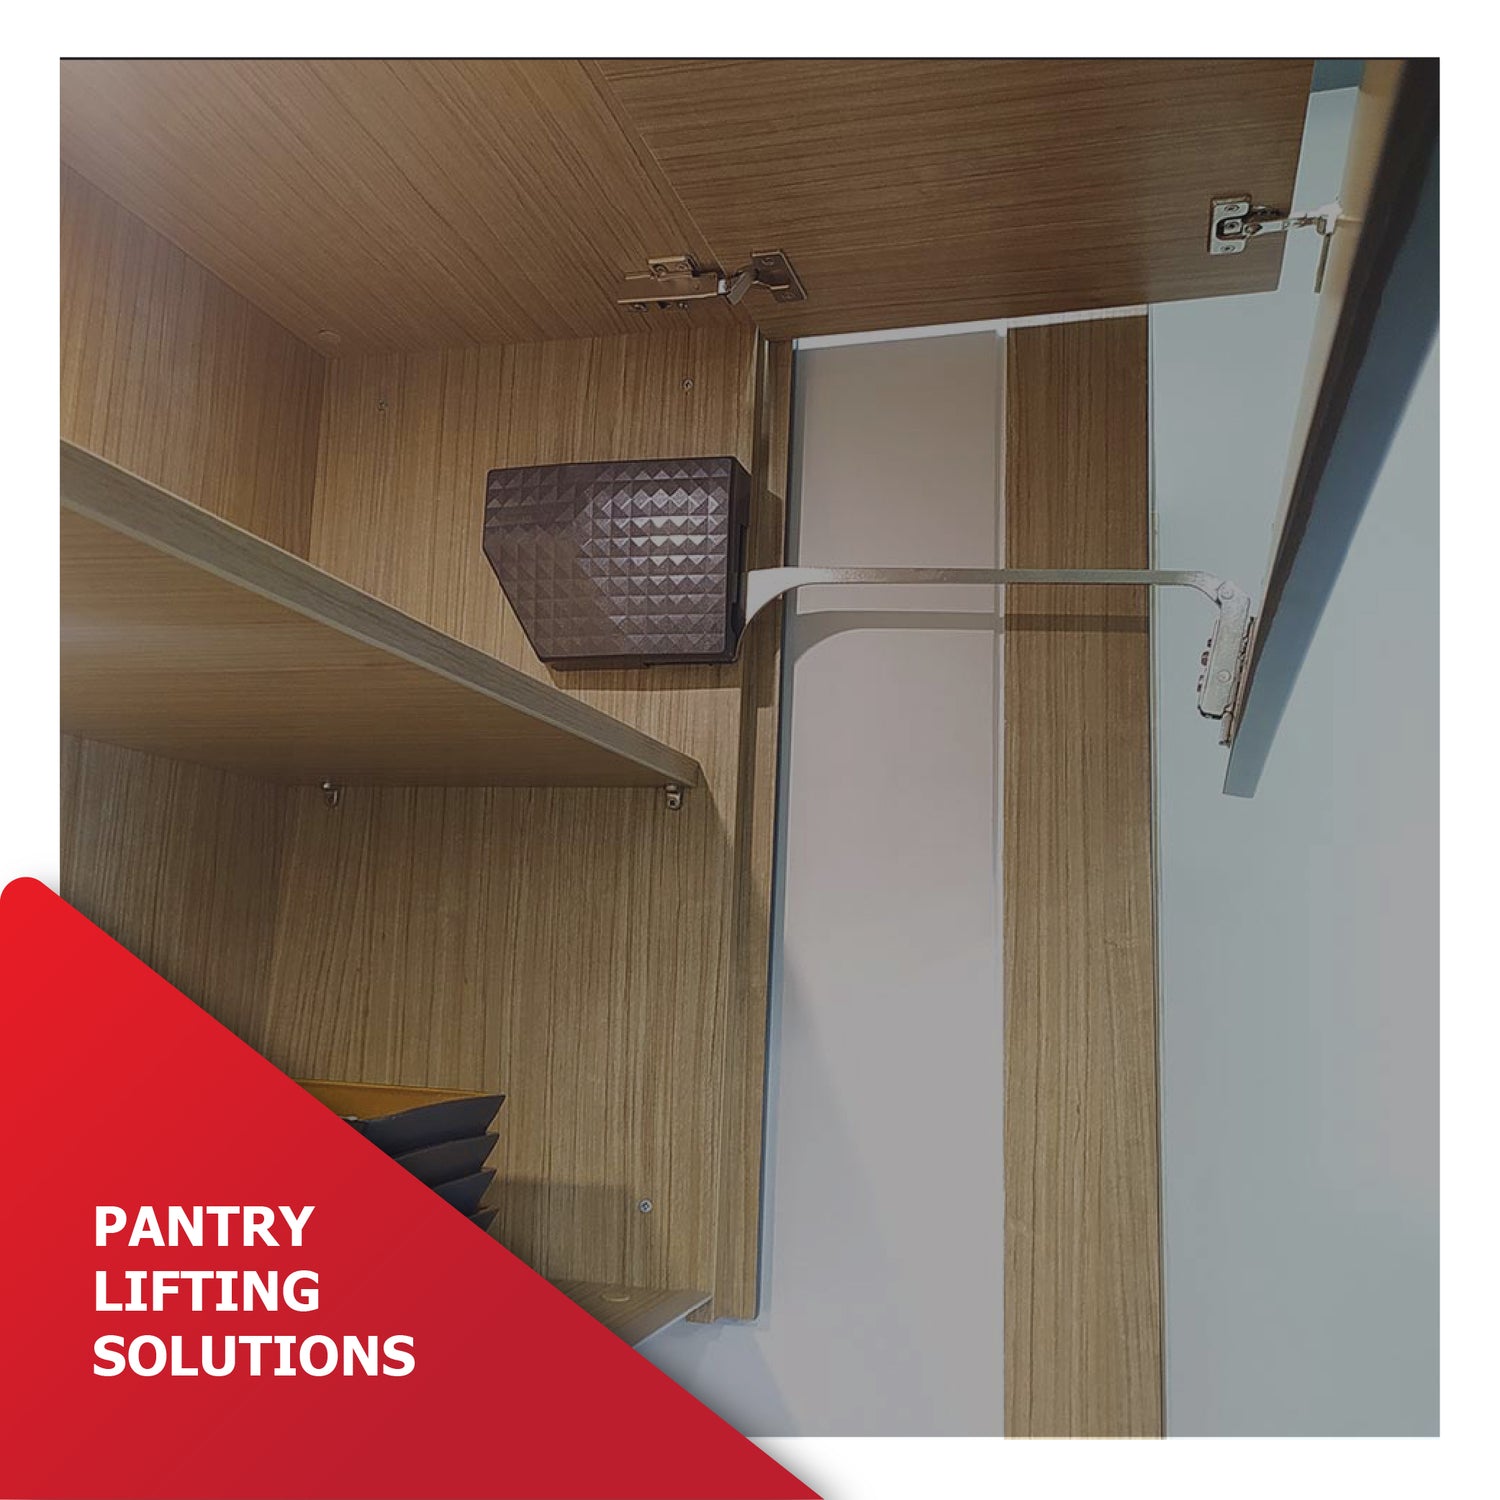 Pantry Lifting Solutions | Category